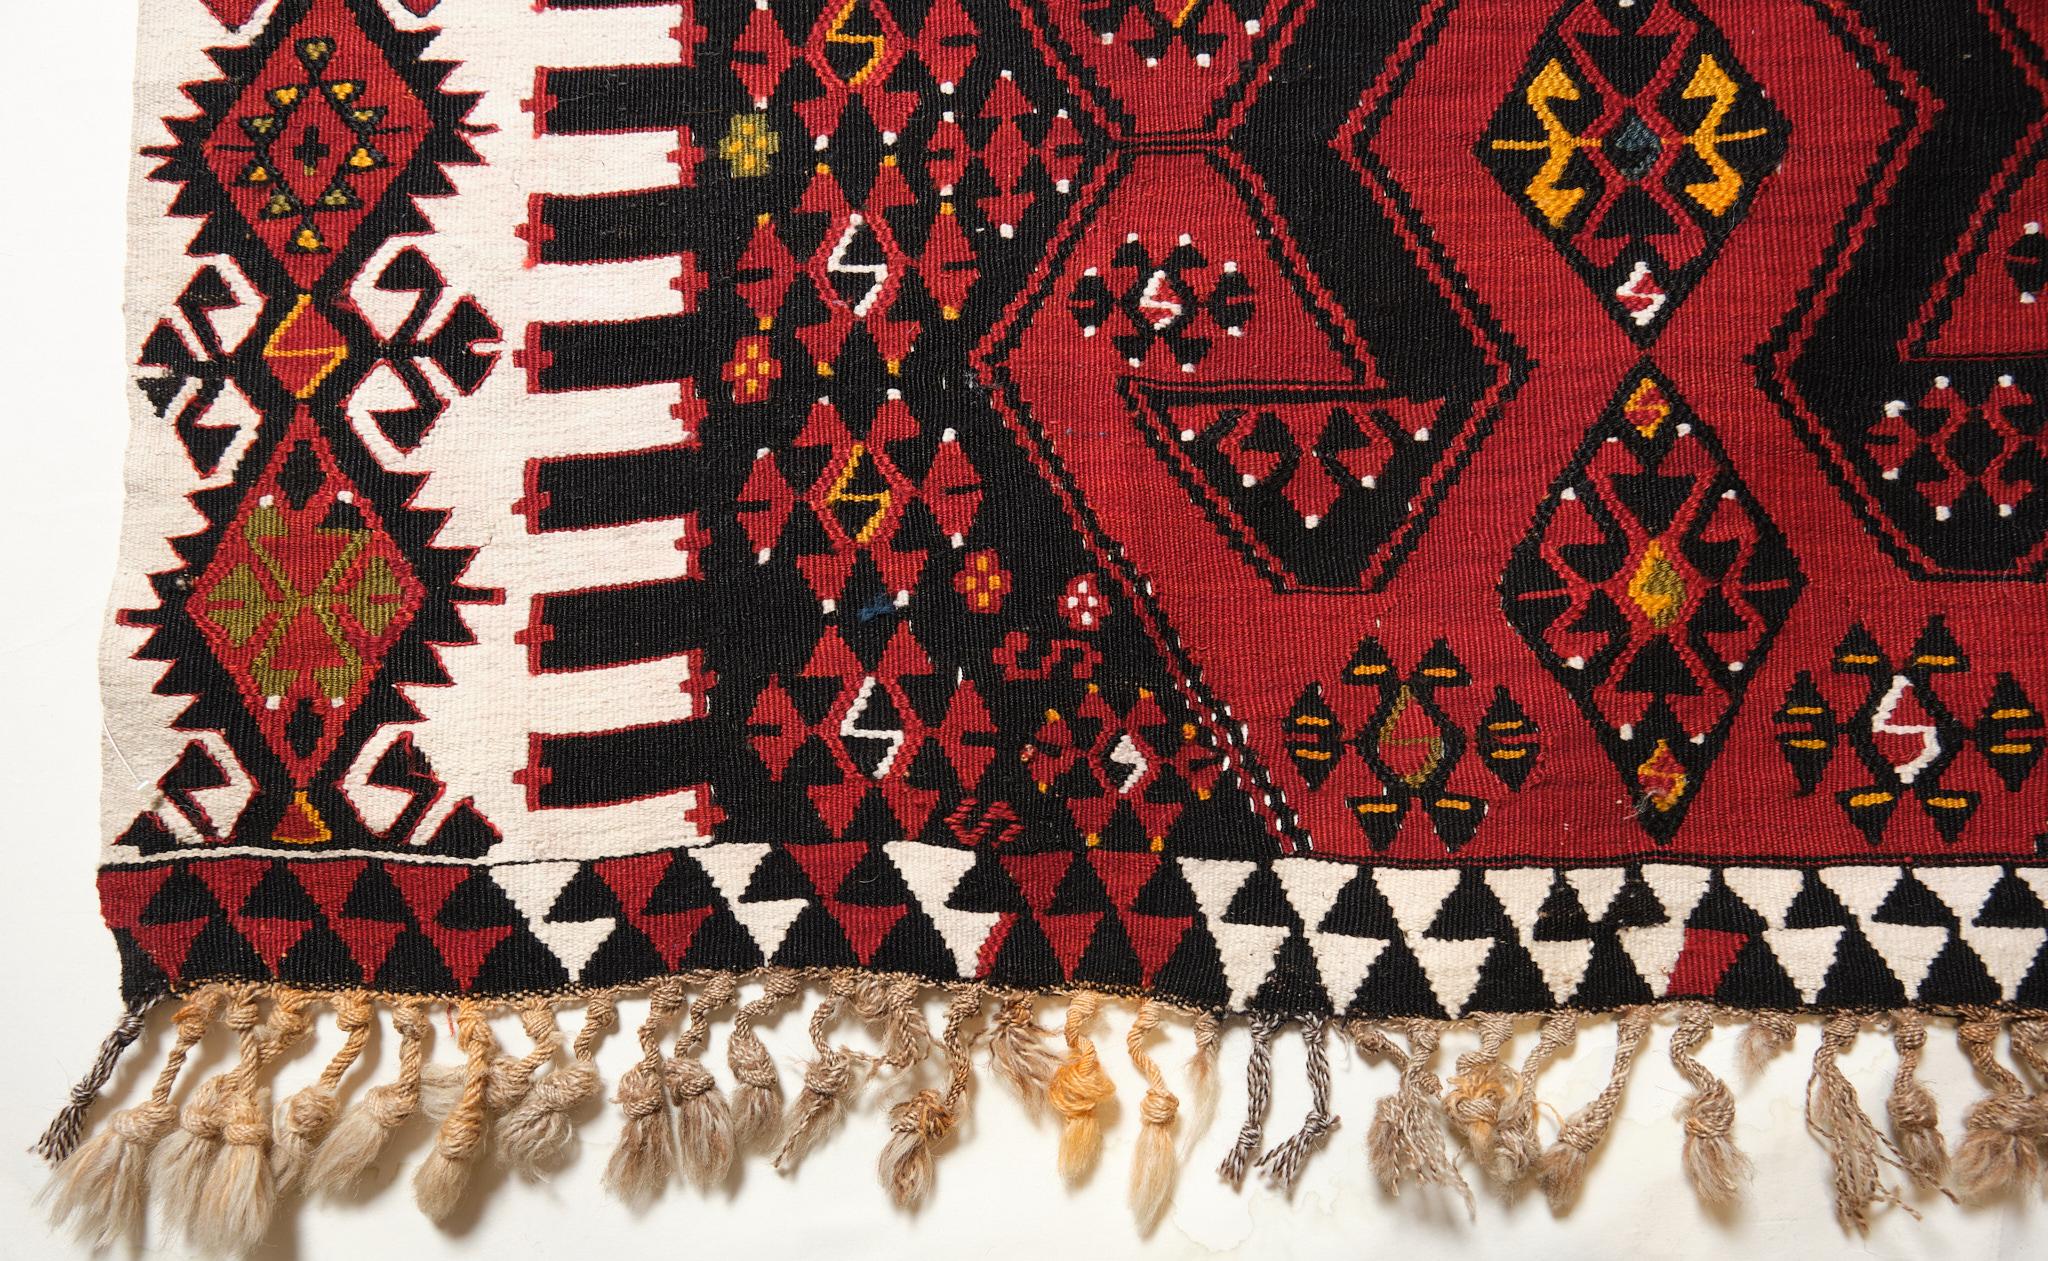 This is a Southern Anatolian Antique Kilim from the Malatya region with a rare and beautiful color composition.

Malatya is a town built on one main street that continues for a number of miles. It is situated in the Tohmasuyu River basin which is